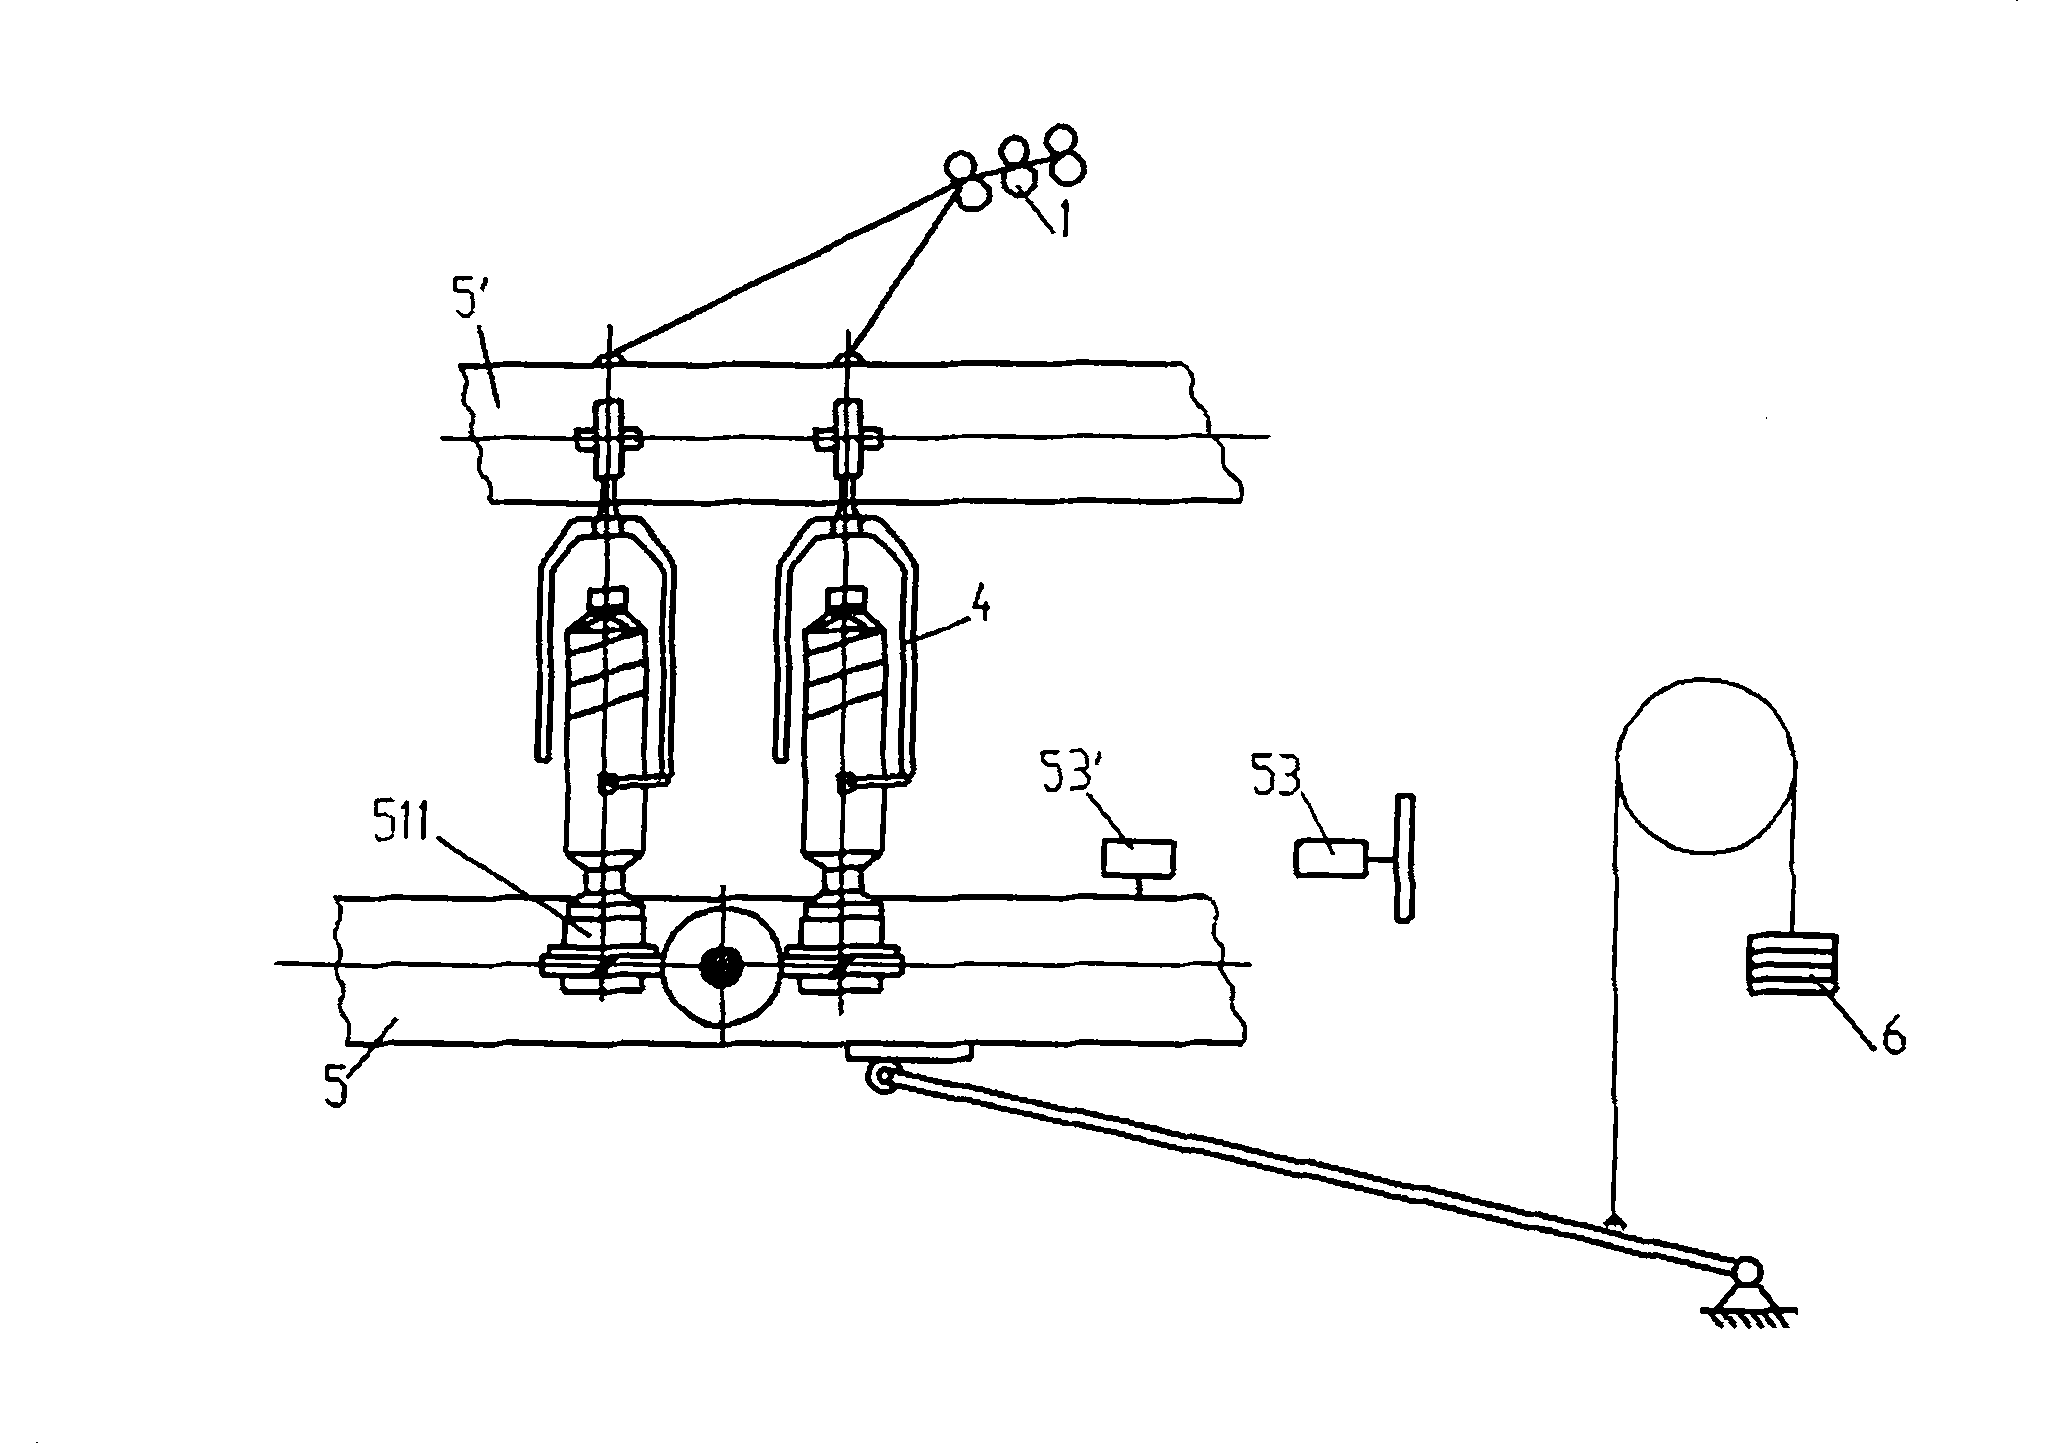 Method for winding and forming rough yarn after bobbiner is full of yarn